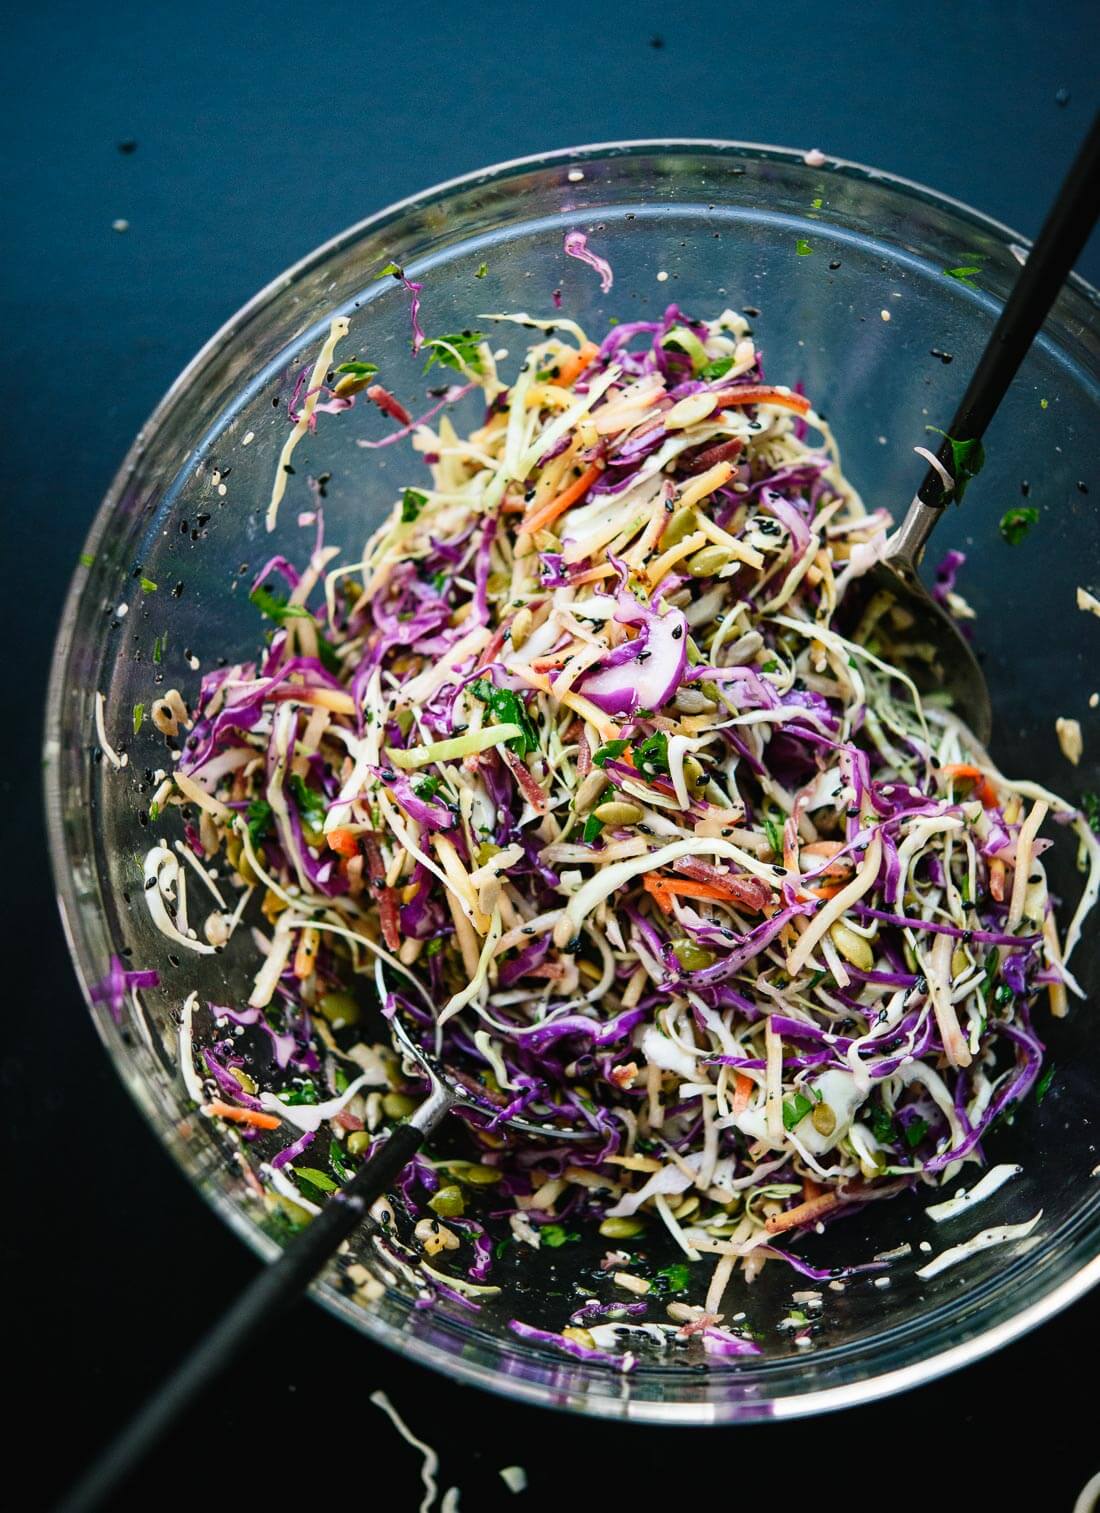 This healthy slaw recipe tastes amazing! It's made with a simple lemon dressing and features toasted sunflower and pumpkin seeds. Gluten free and vegan. - cookieandkate.com